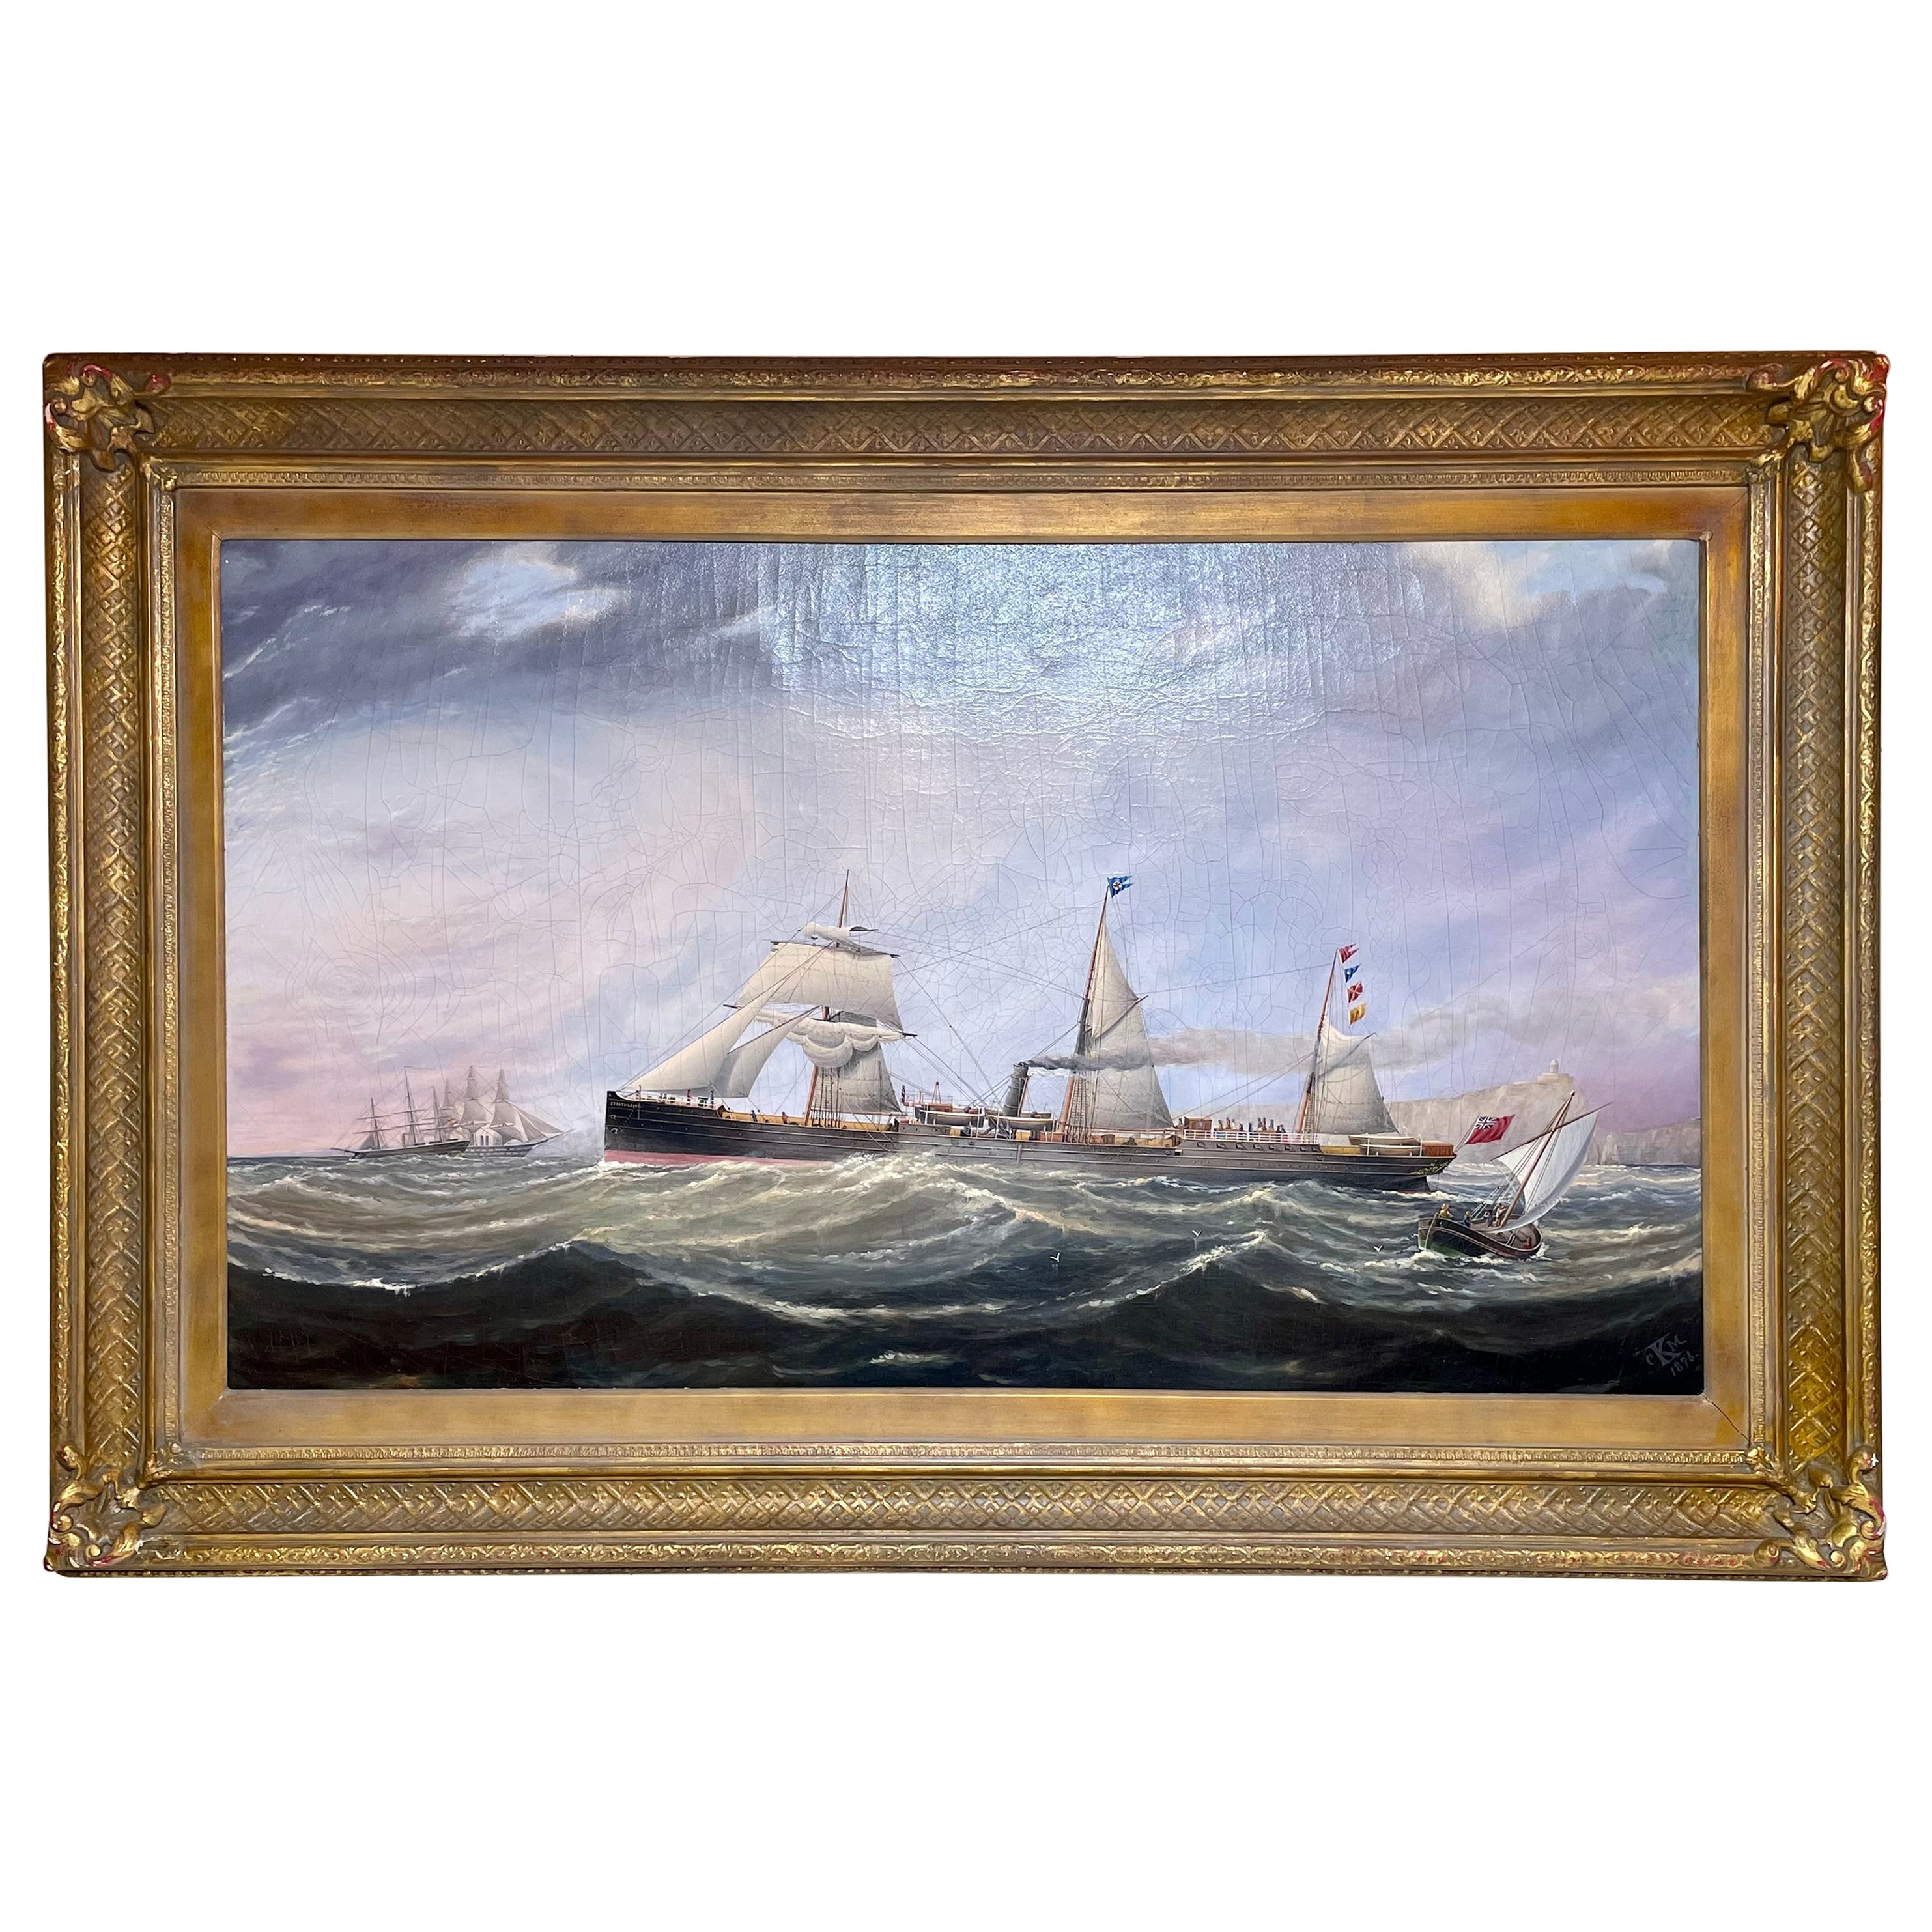 Large Antique English Oil on Canvas Ship Painting by Charles Keith Miller, 1876. For Sale